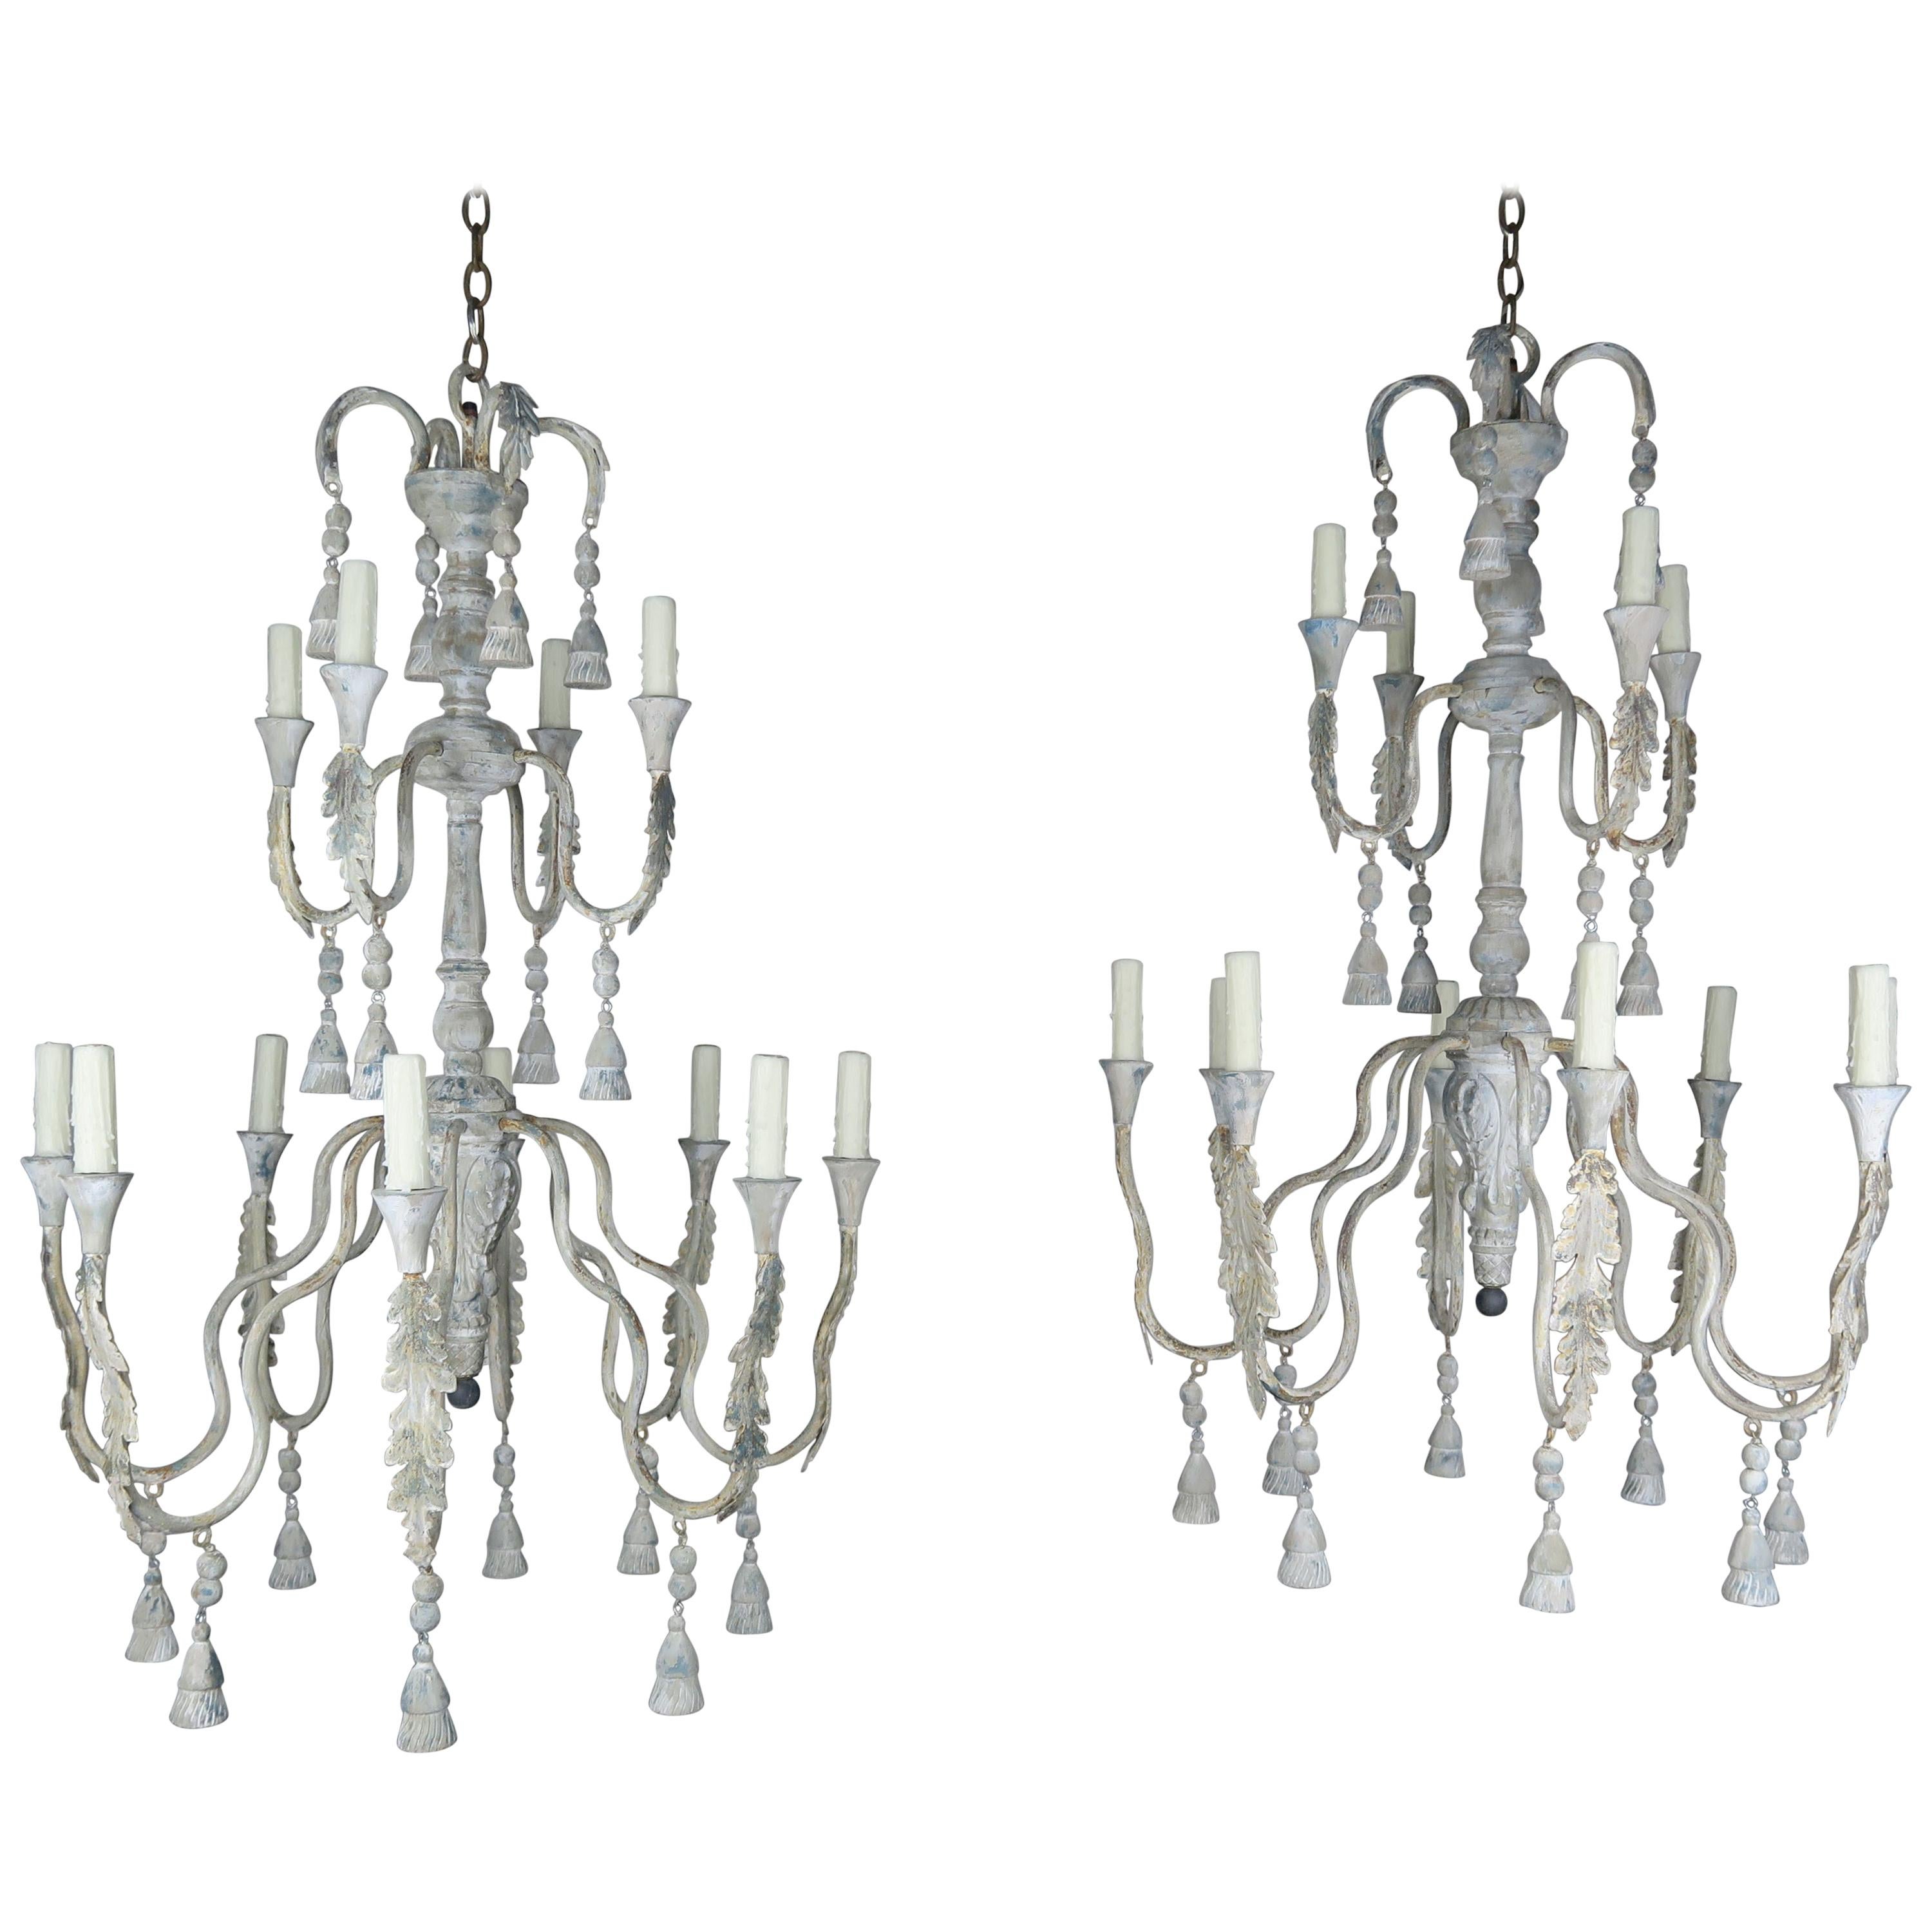 2-Tier Painted Cream Colored Chandeliers with Tassels by Melissa Levinson